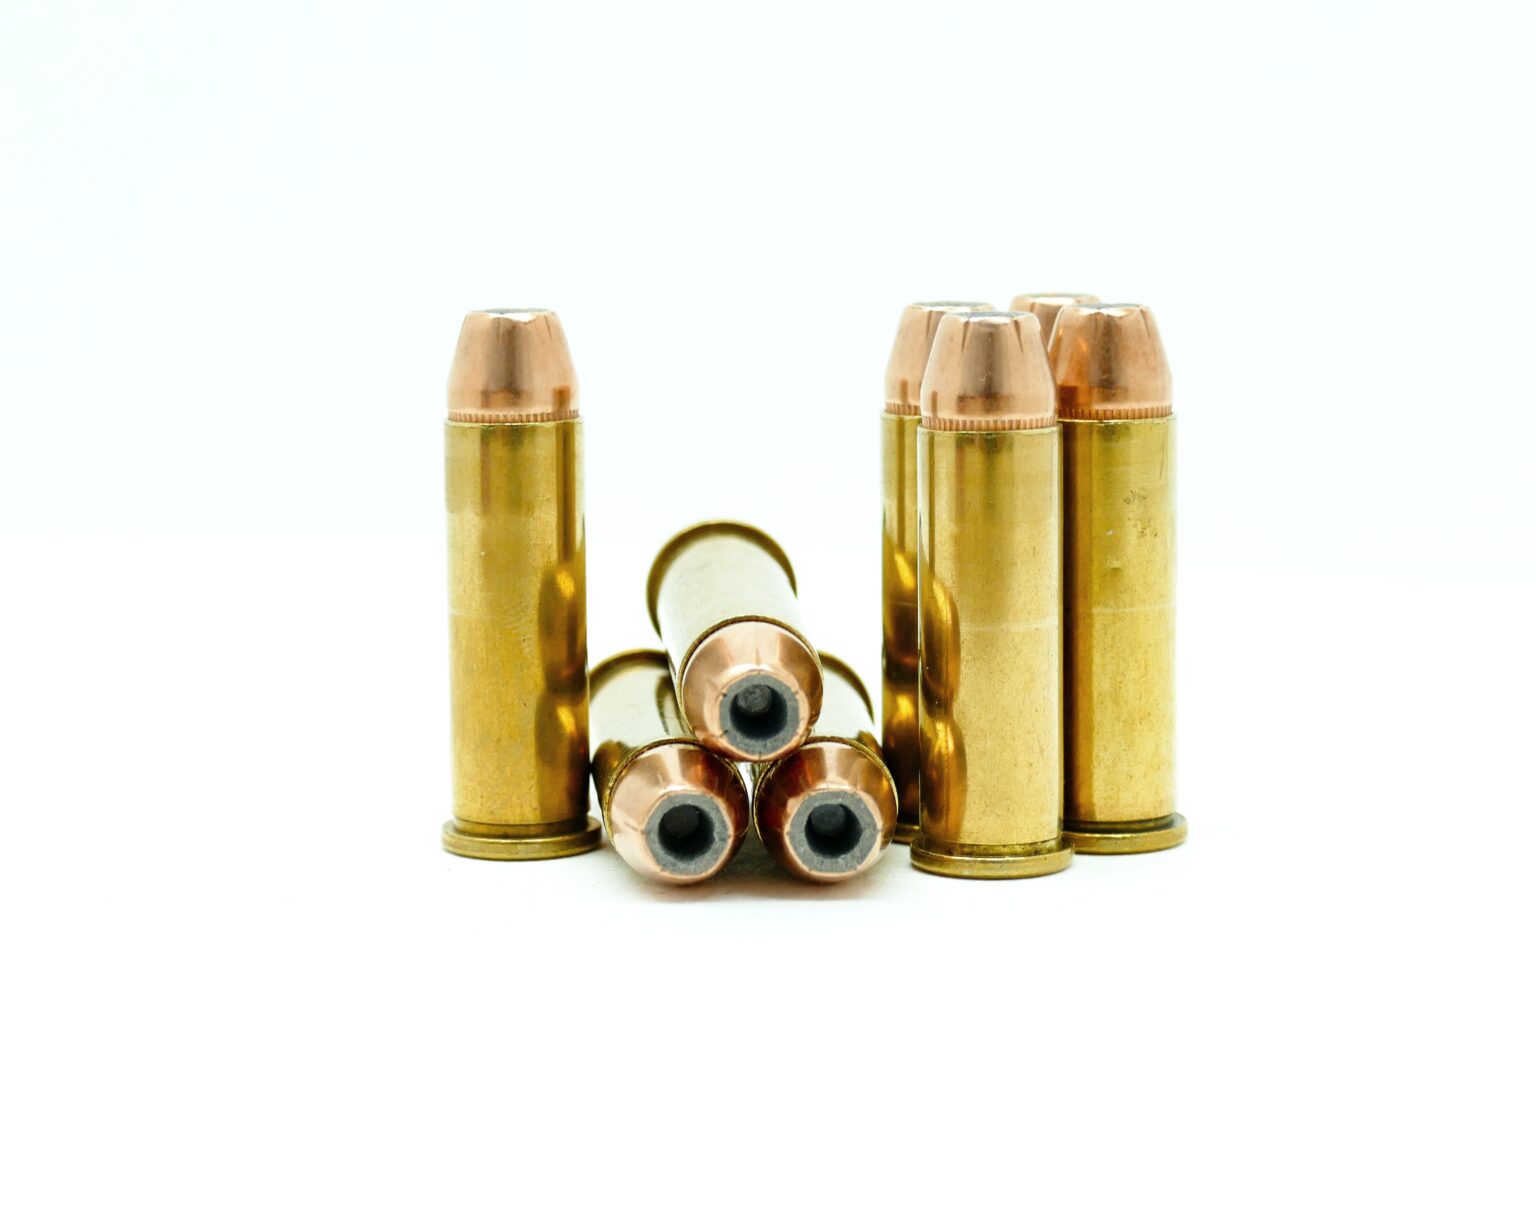 357 Magnum Personal Self Defense / Hunting Ammunition with 158 Grain ...